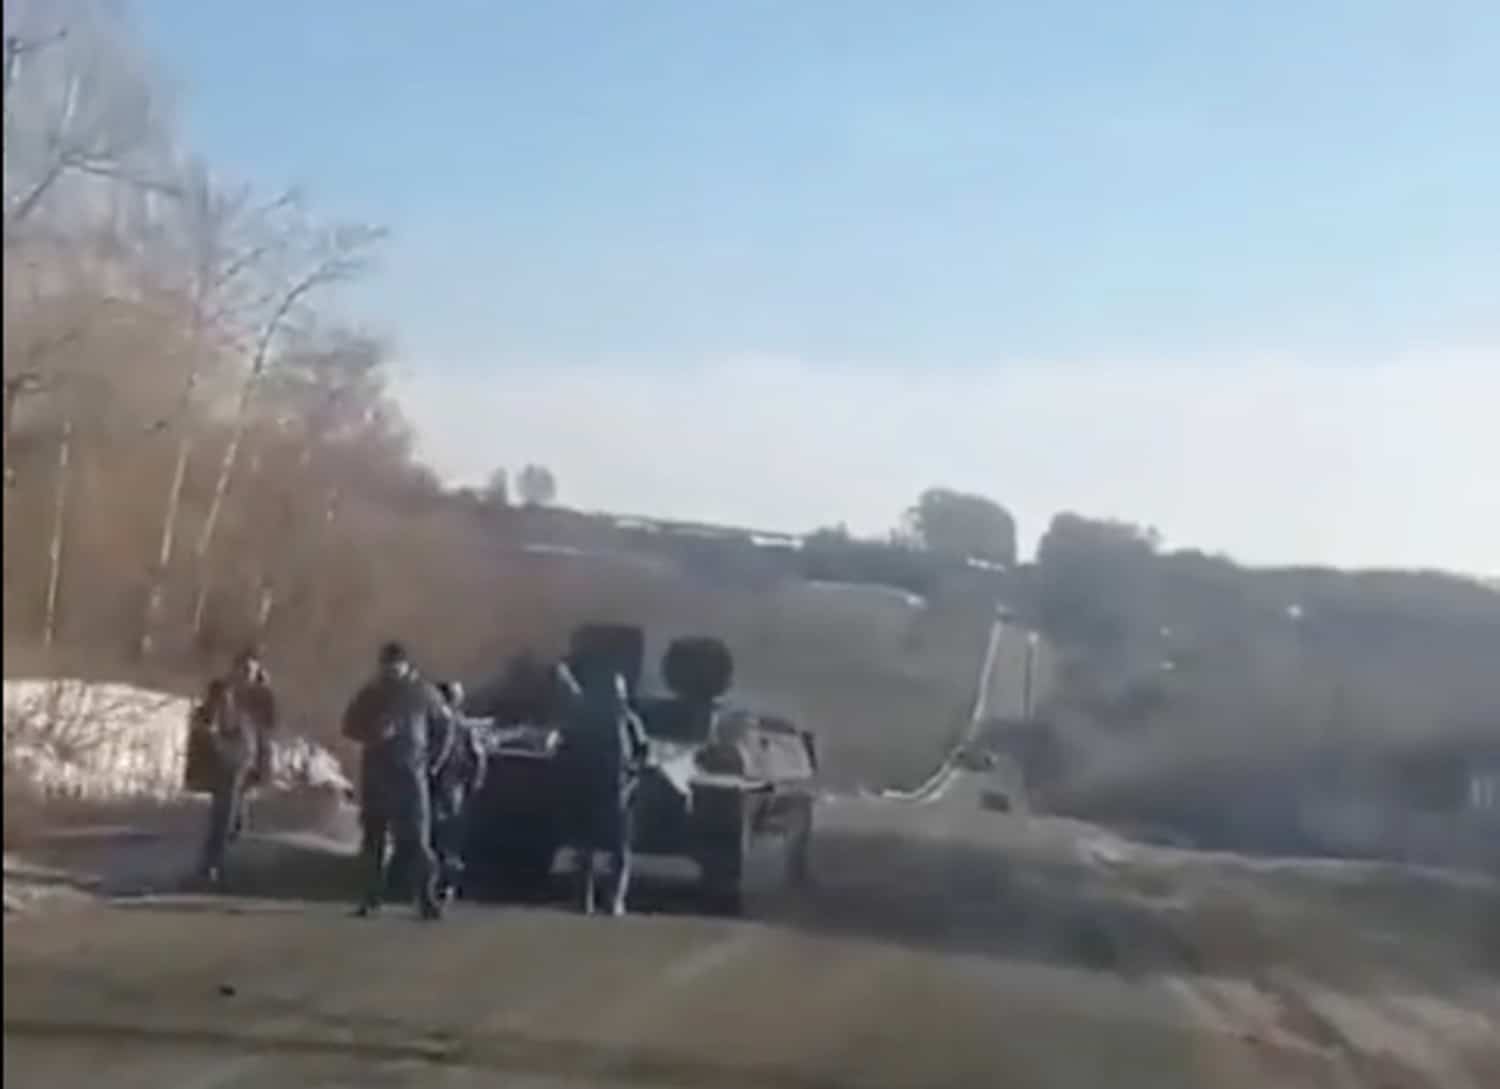 Ukrainian driver asks broken-down soldiers: ‘Want me to tow you back to Russia?’